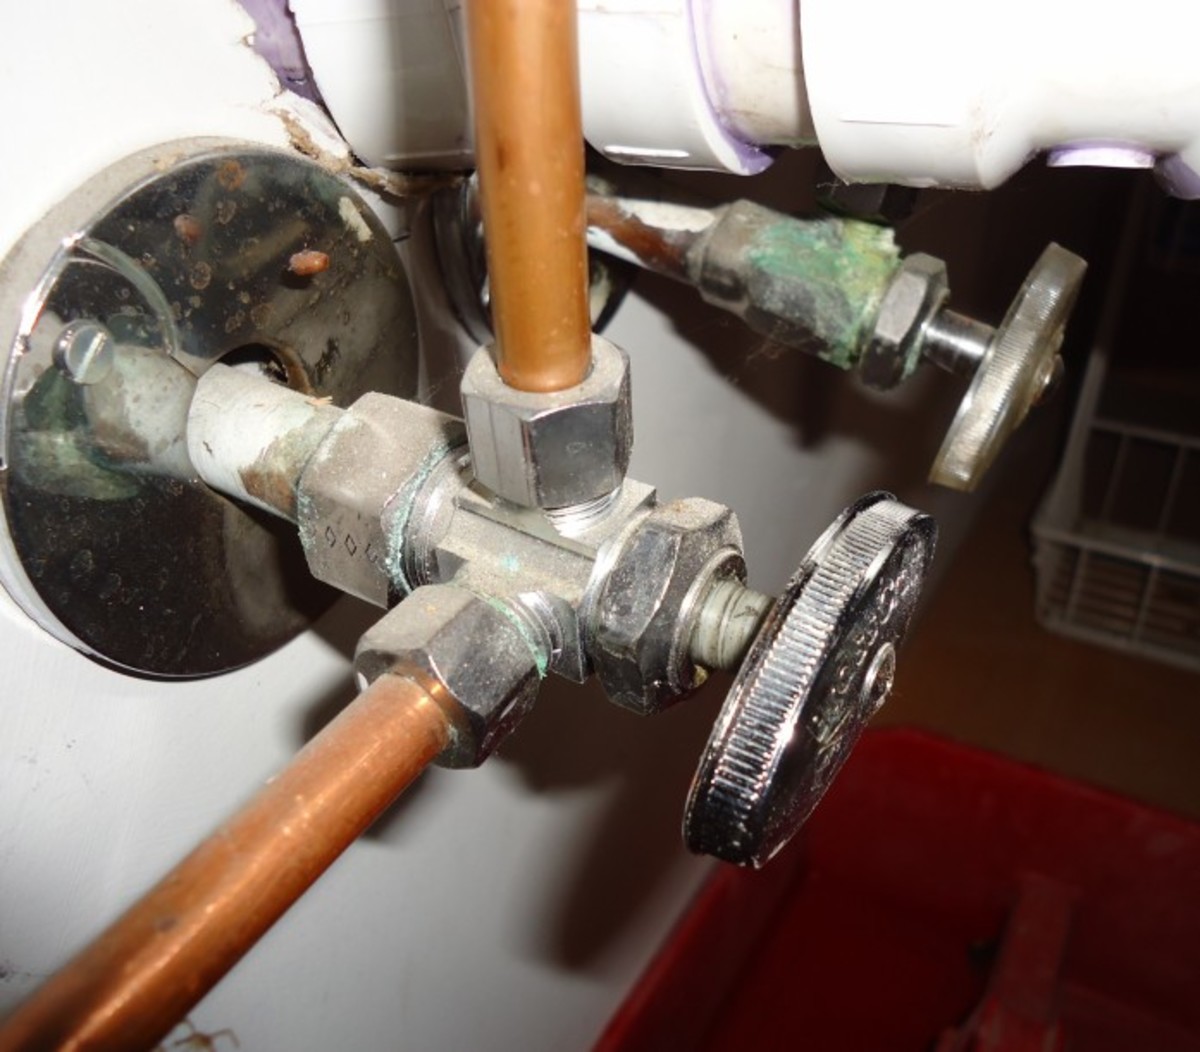 A Water Shut-Off Valve: Its Importance and Locations 